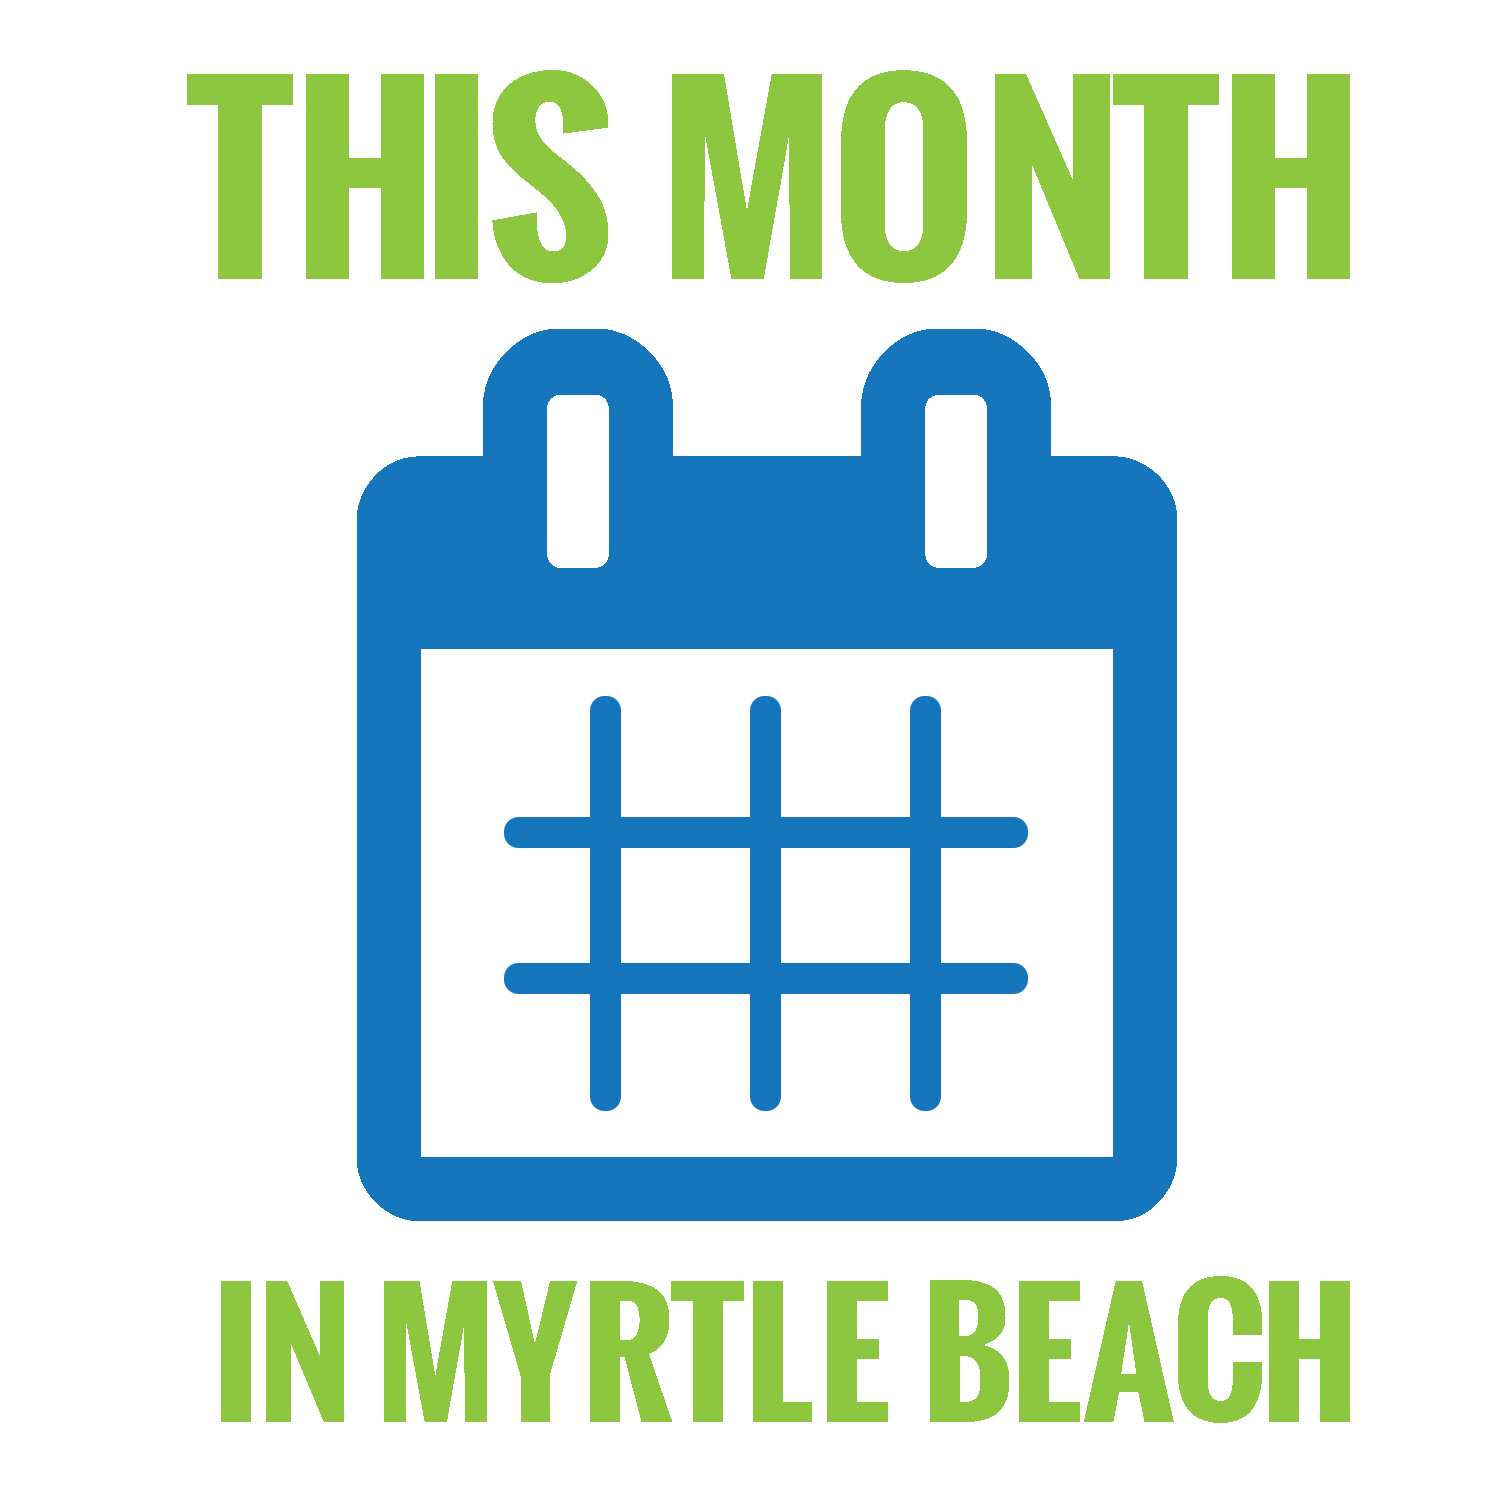 myrtle-beach-events-calendar-myrtle-beach-real-estate-for-sale-home-and-condos